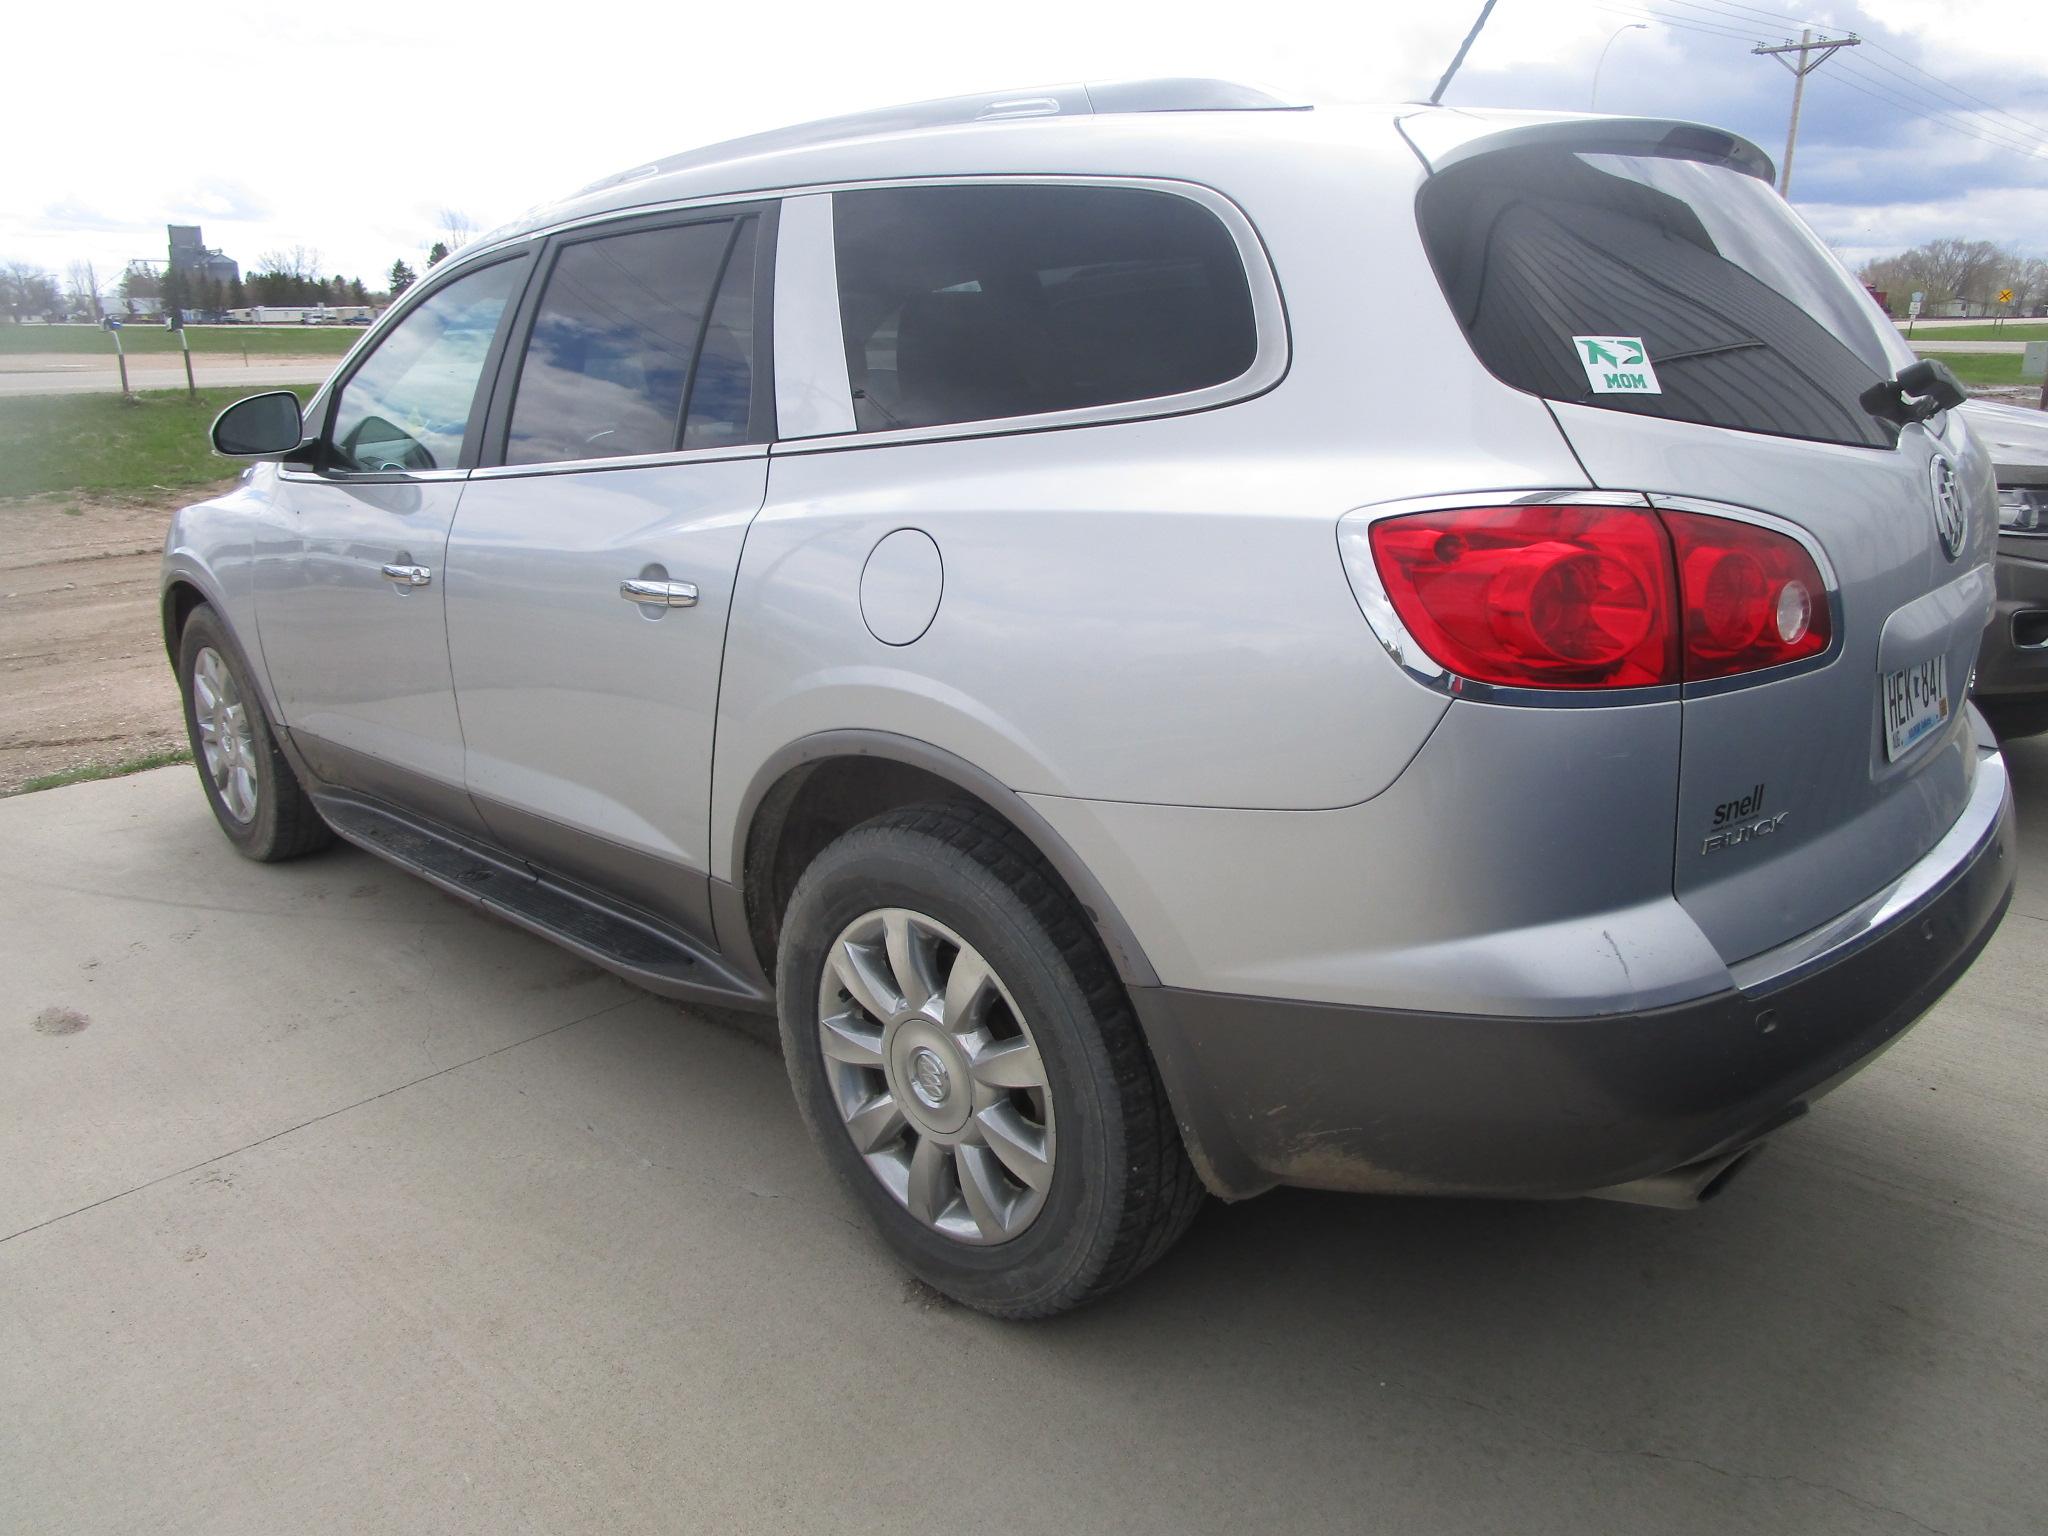 2011 BUICK ENCLAVE, frt. wheel drive, loaded, new battery, 230,000 miles, ph. 686-4651